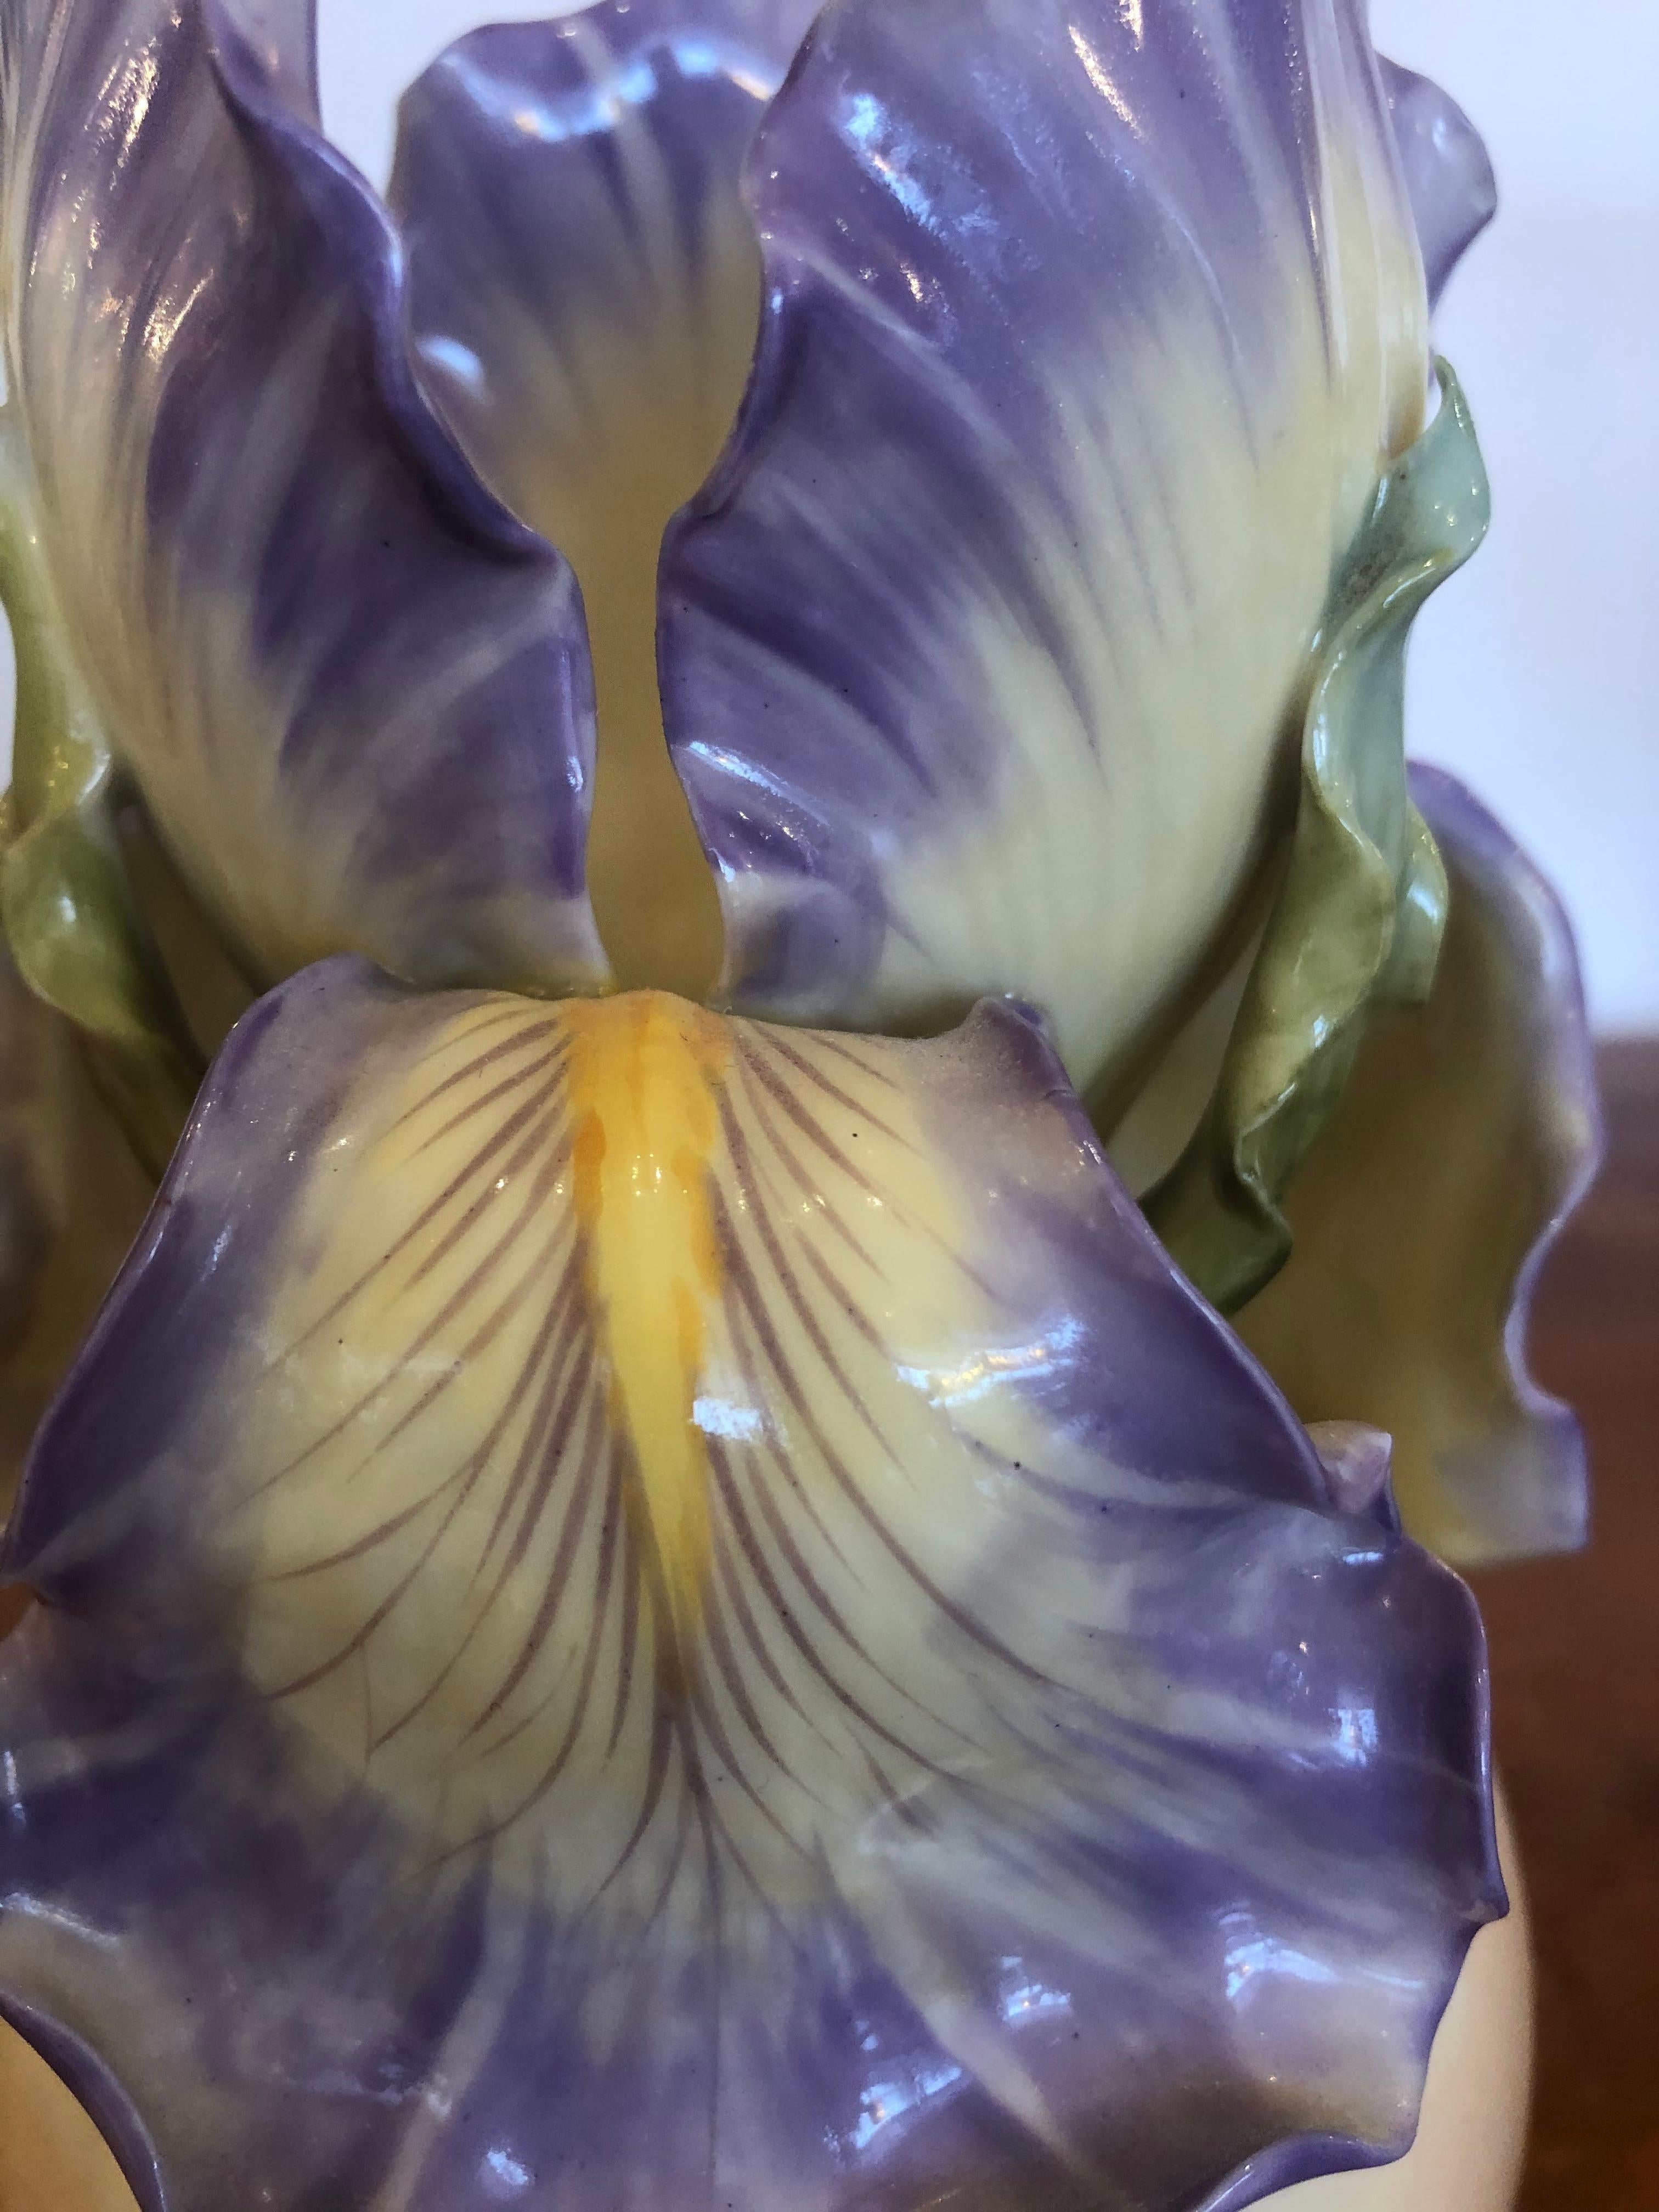 A magical object of art vase with the exquisite petals of a blossoming iris flower.